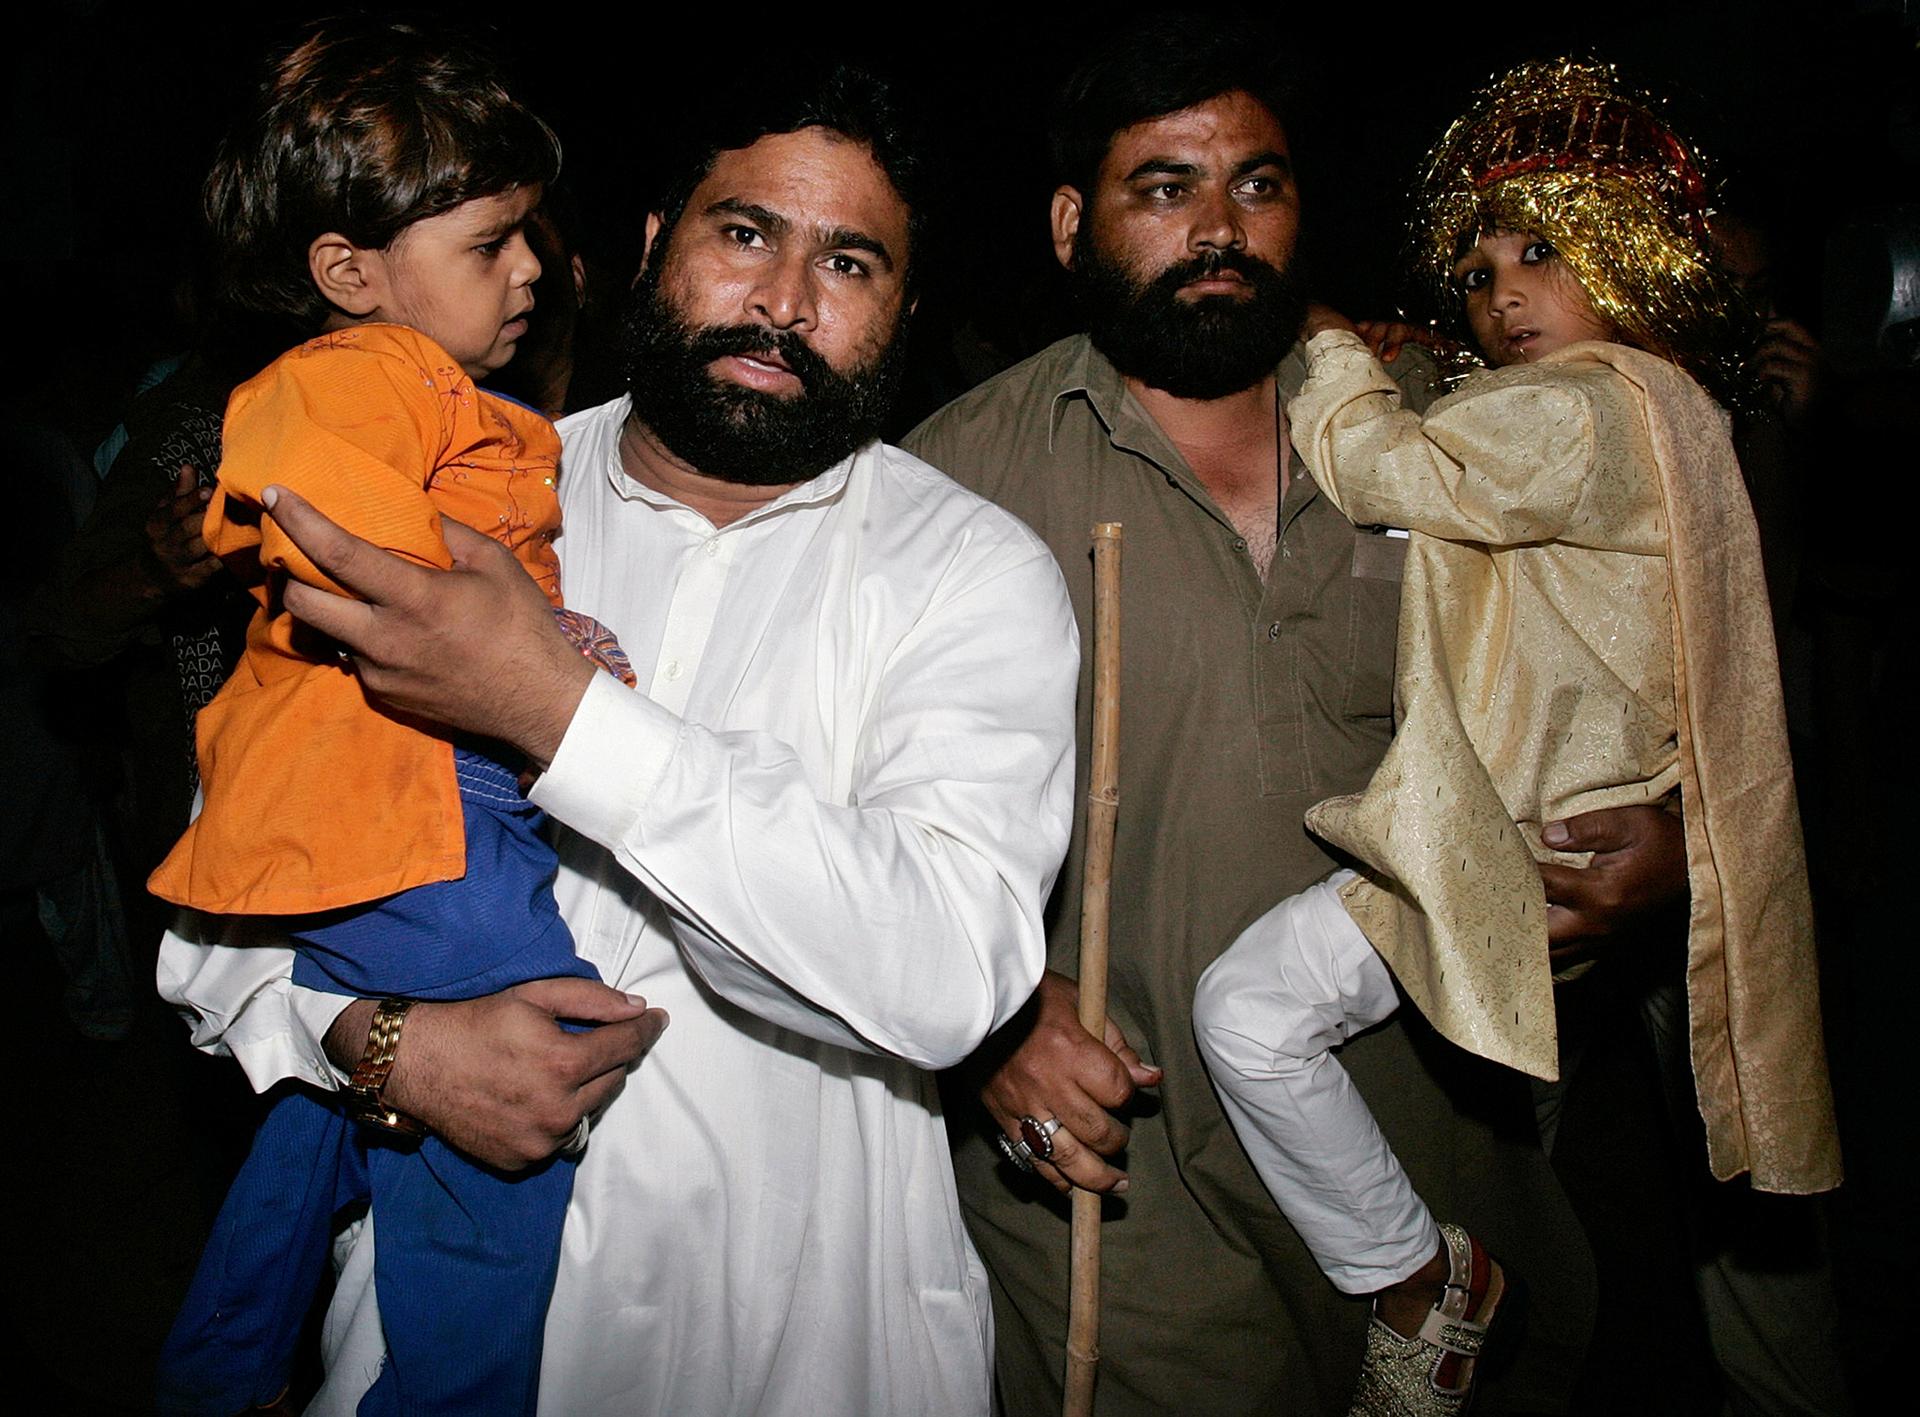 Seven-year-old groom Mohammad Waseem (R) and his 4-year-old bride Nisha (L) are escorted by security officials at a police station in Karachi after Pakistani police raided a child marriage ceremony and arrested a cleric who was presiding over the wedding,